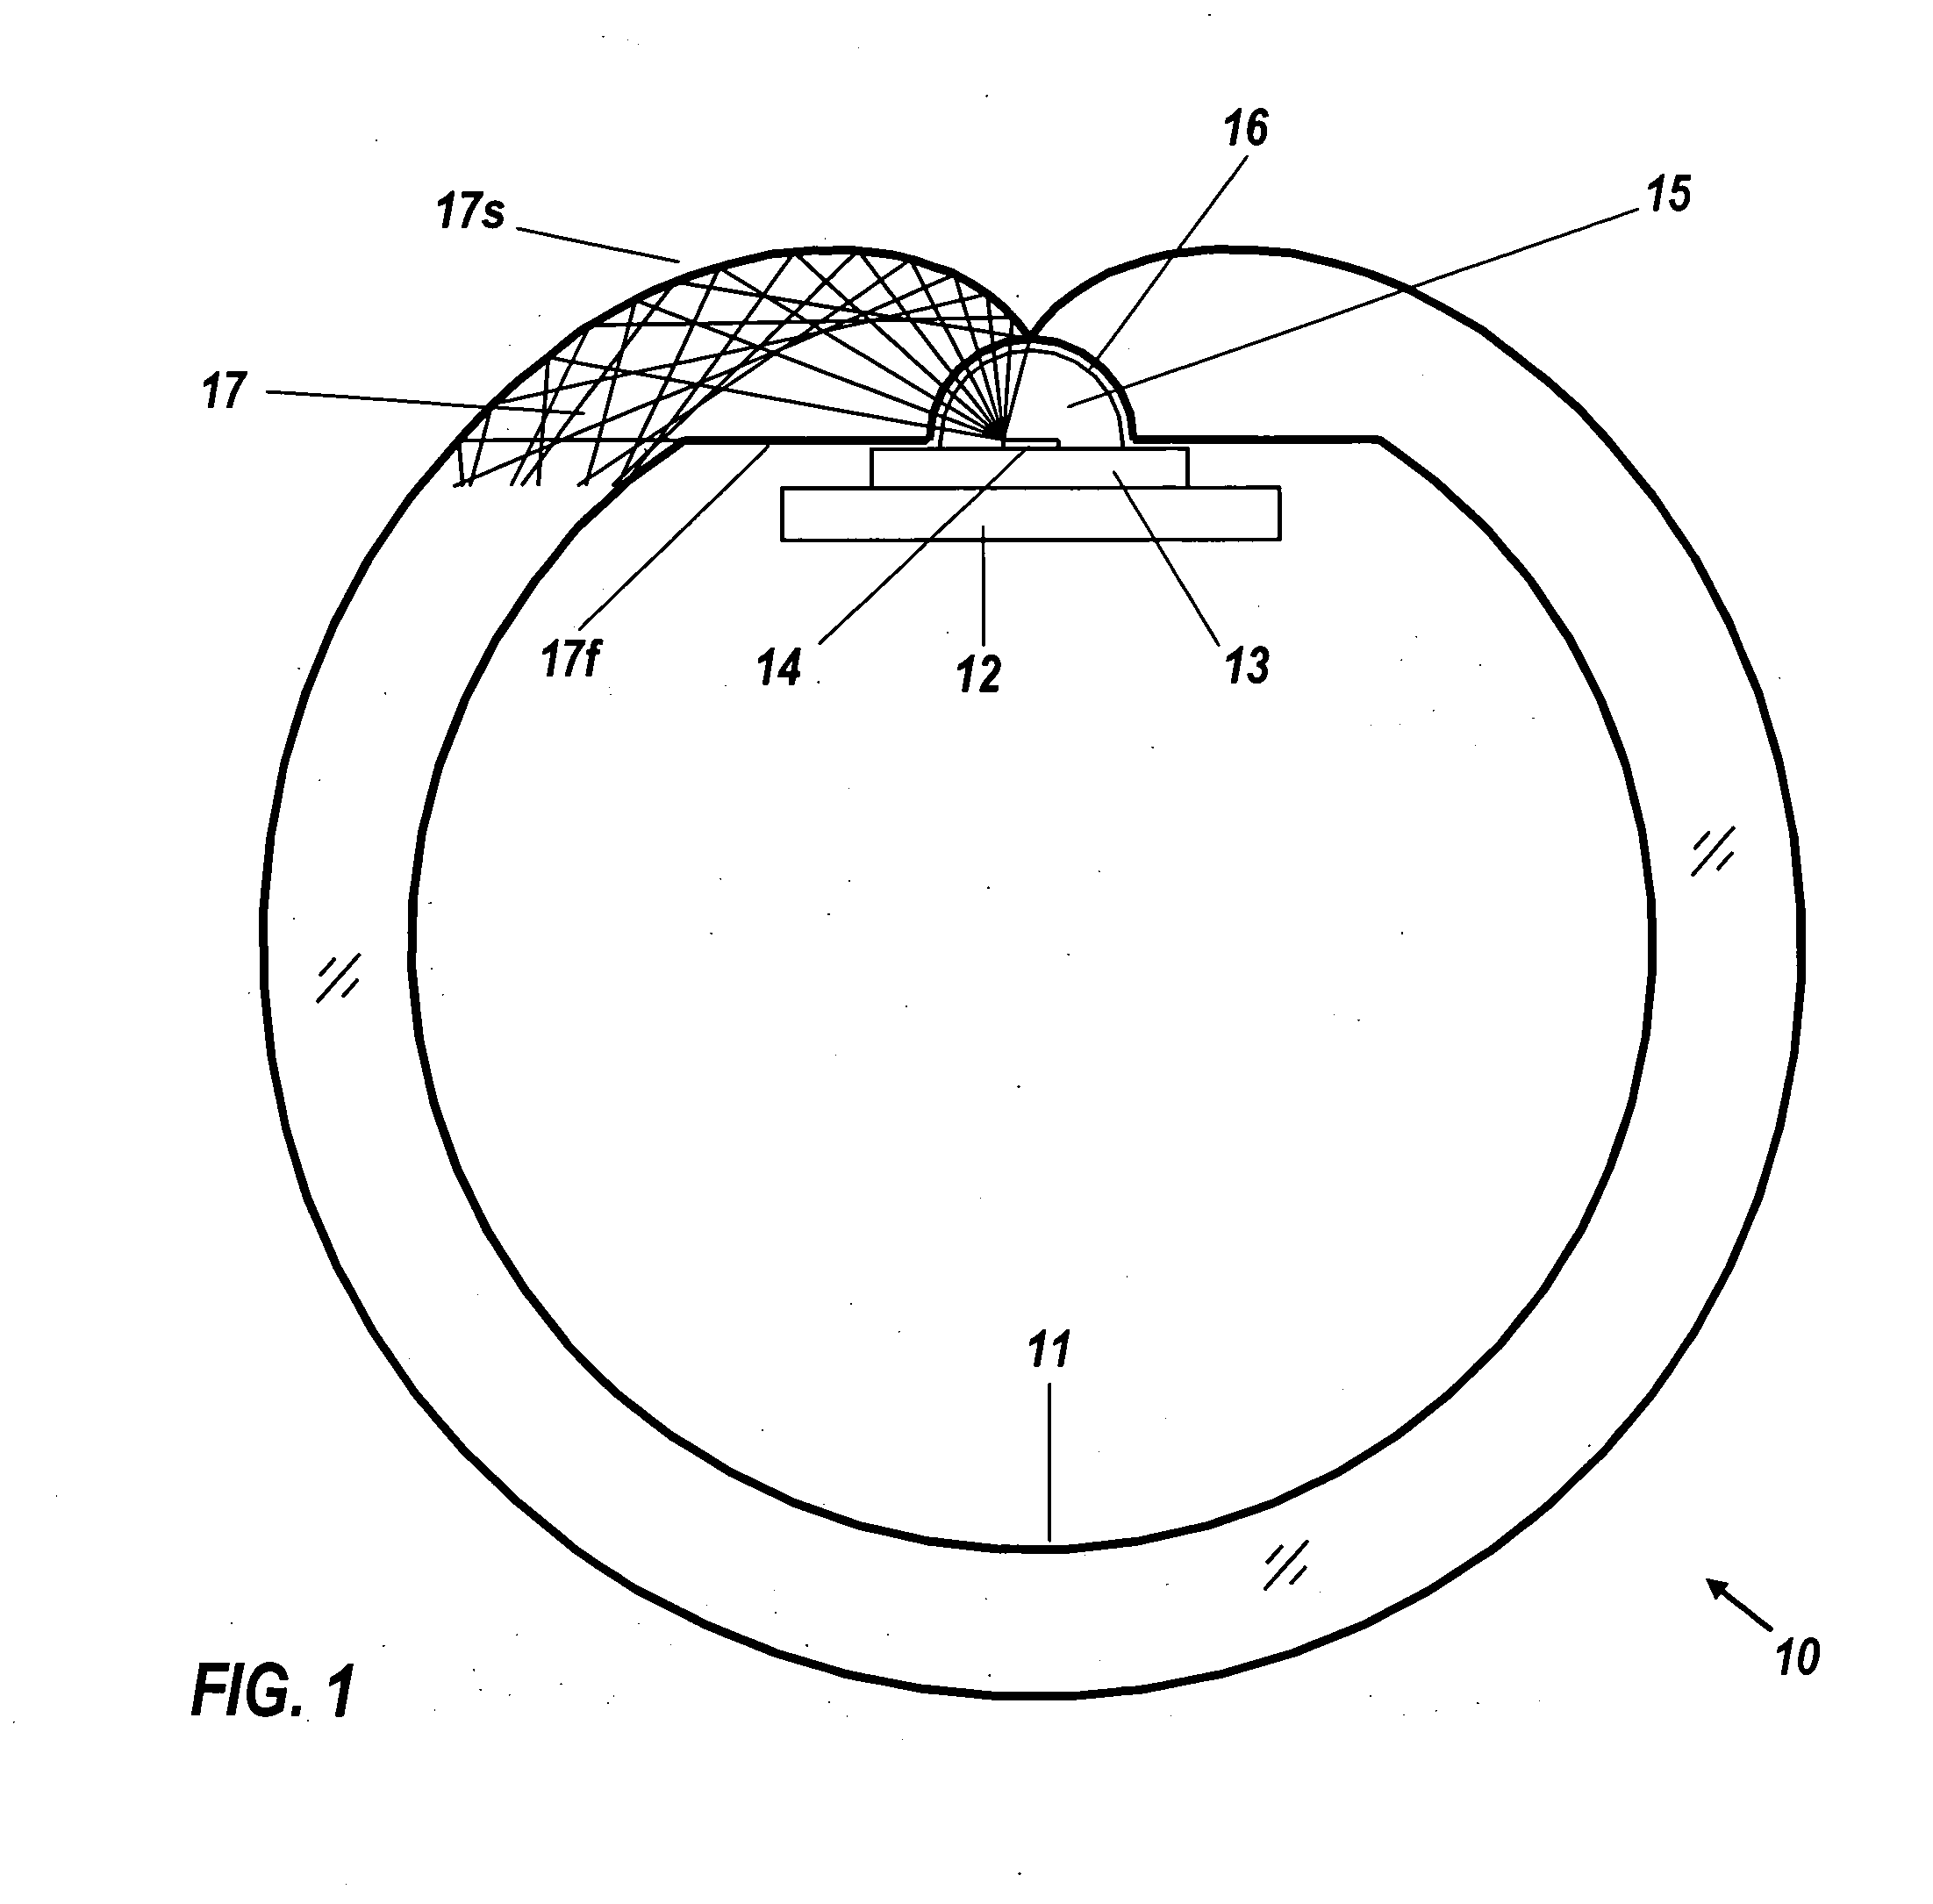 Neon-tube substitute using light-emitting diodes